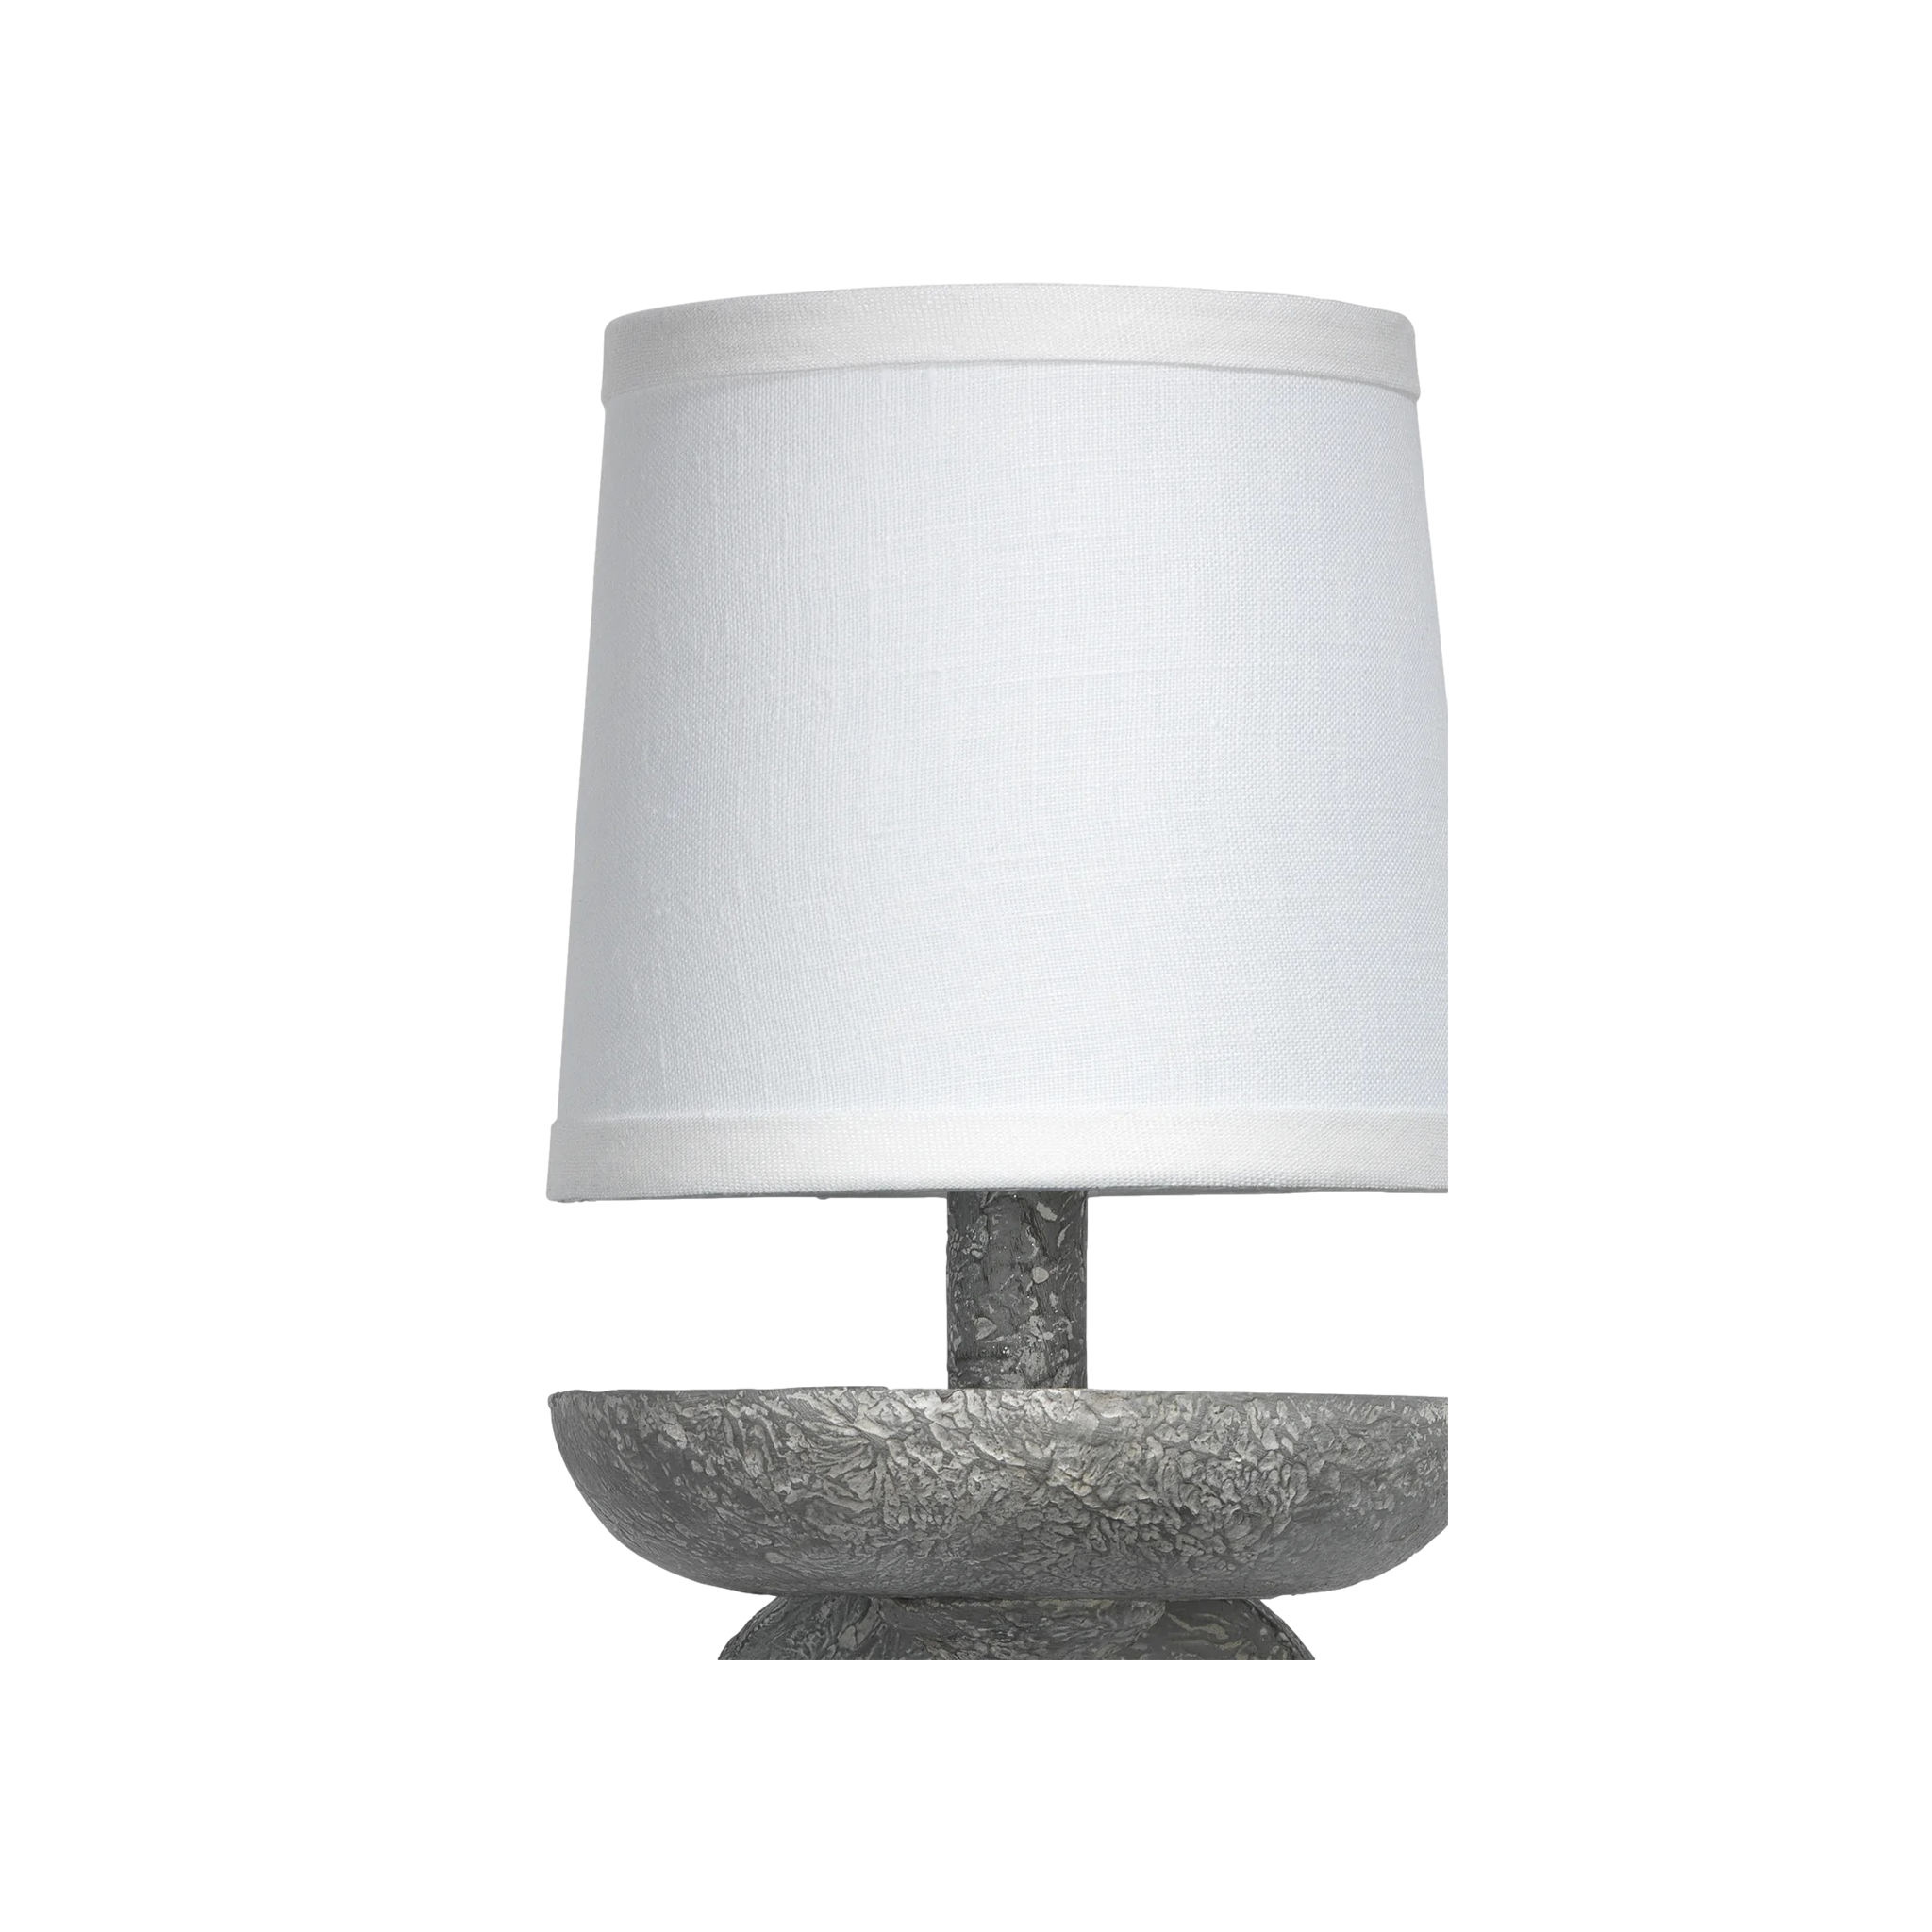 Concord Wall Sconce (Grey)